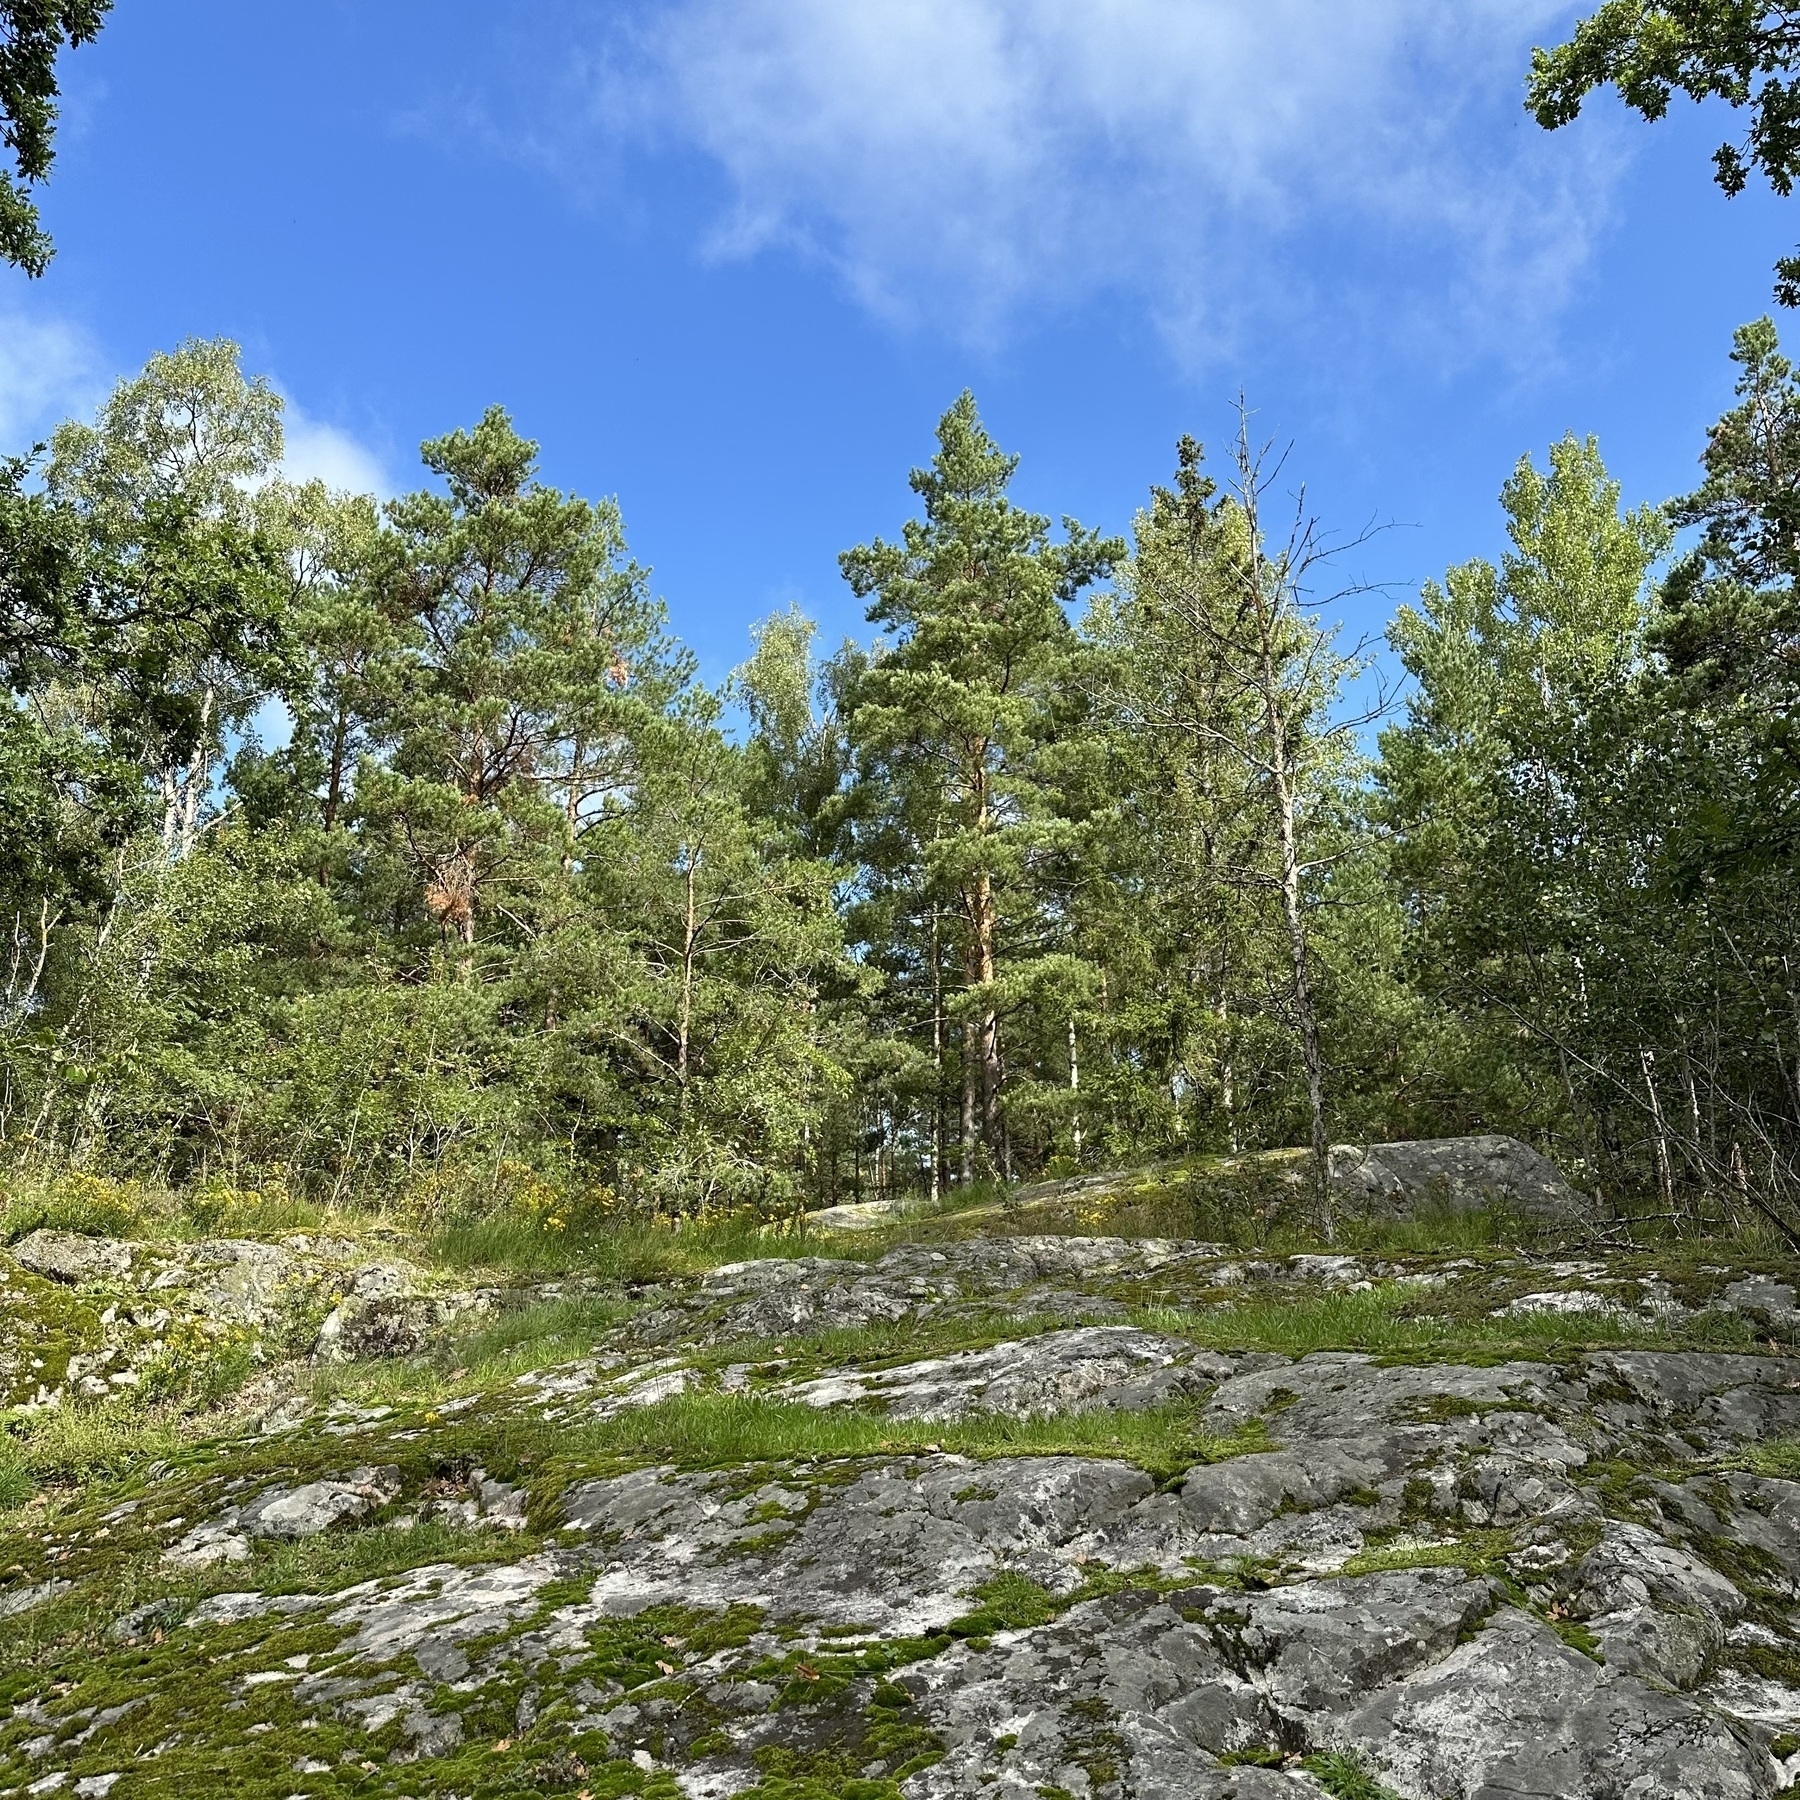 Blue sky above trees, with rocky outcrops in the foreground.